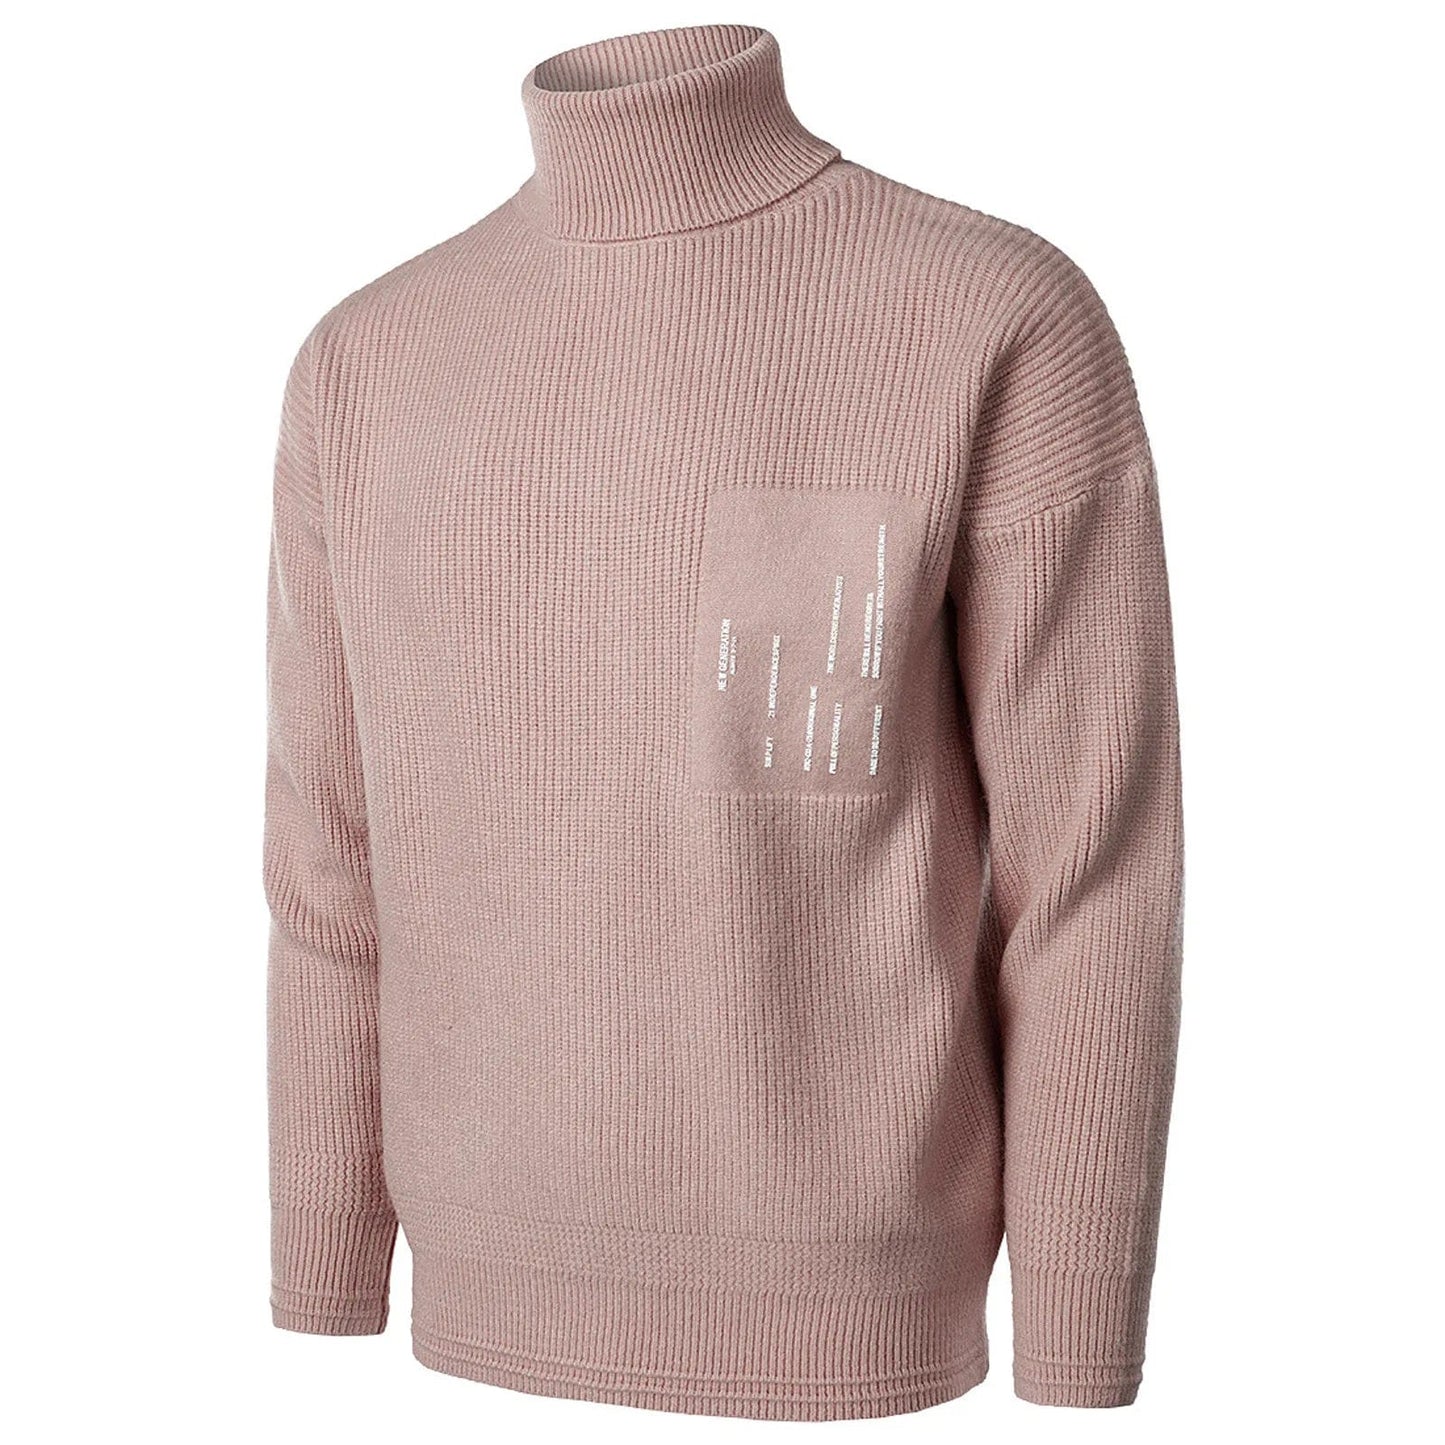 Men's Warm Sweater Top High Collar O-neck Long Sleeve Loose Chunky Knitted Pullover Sweater Jumper Tops Sweater